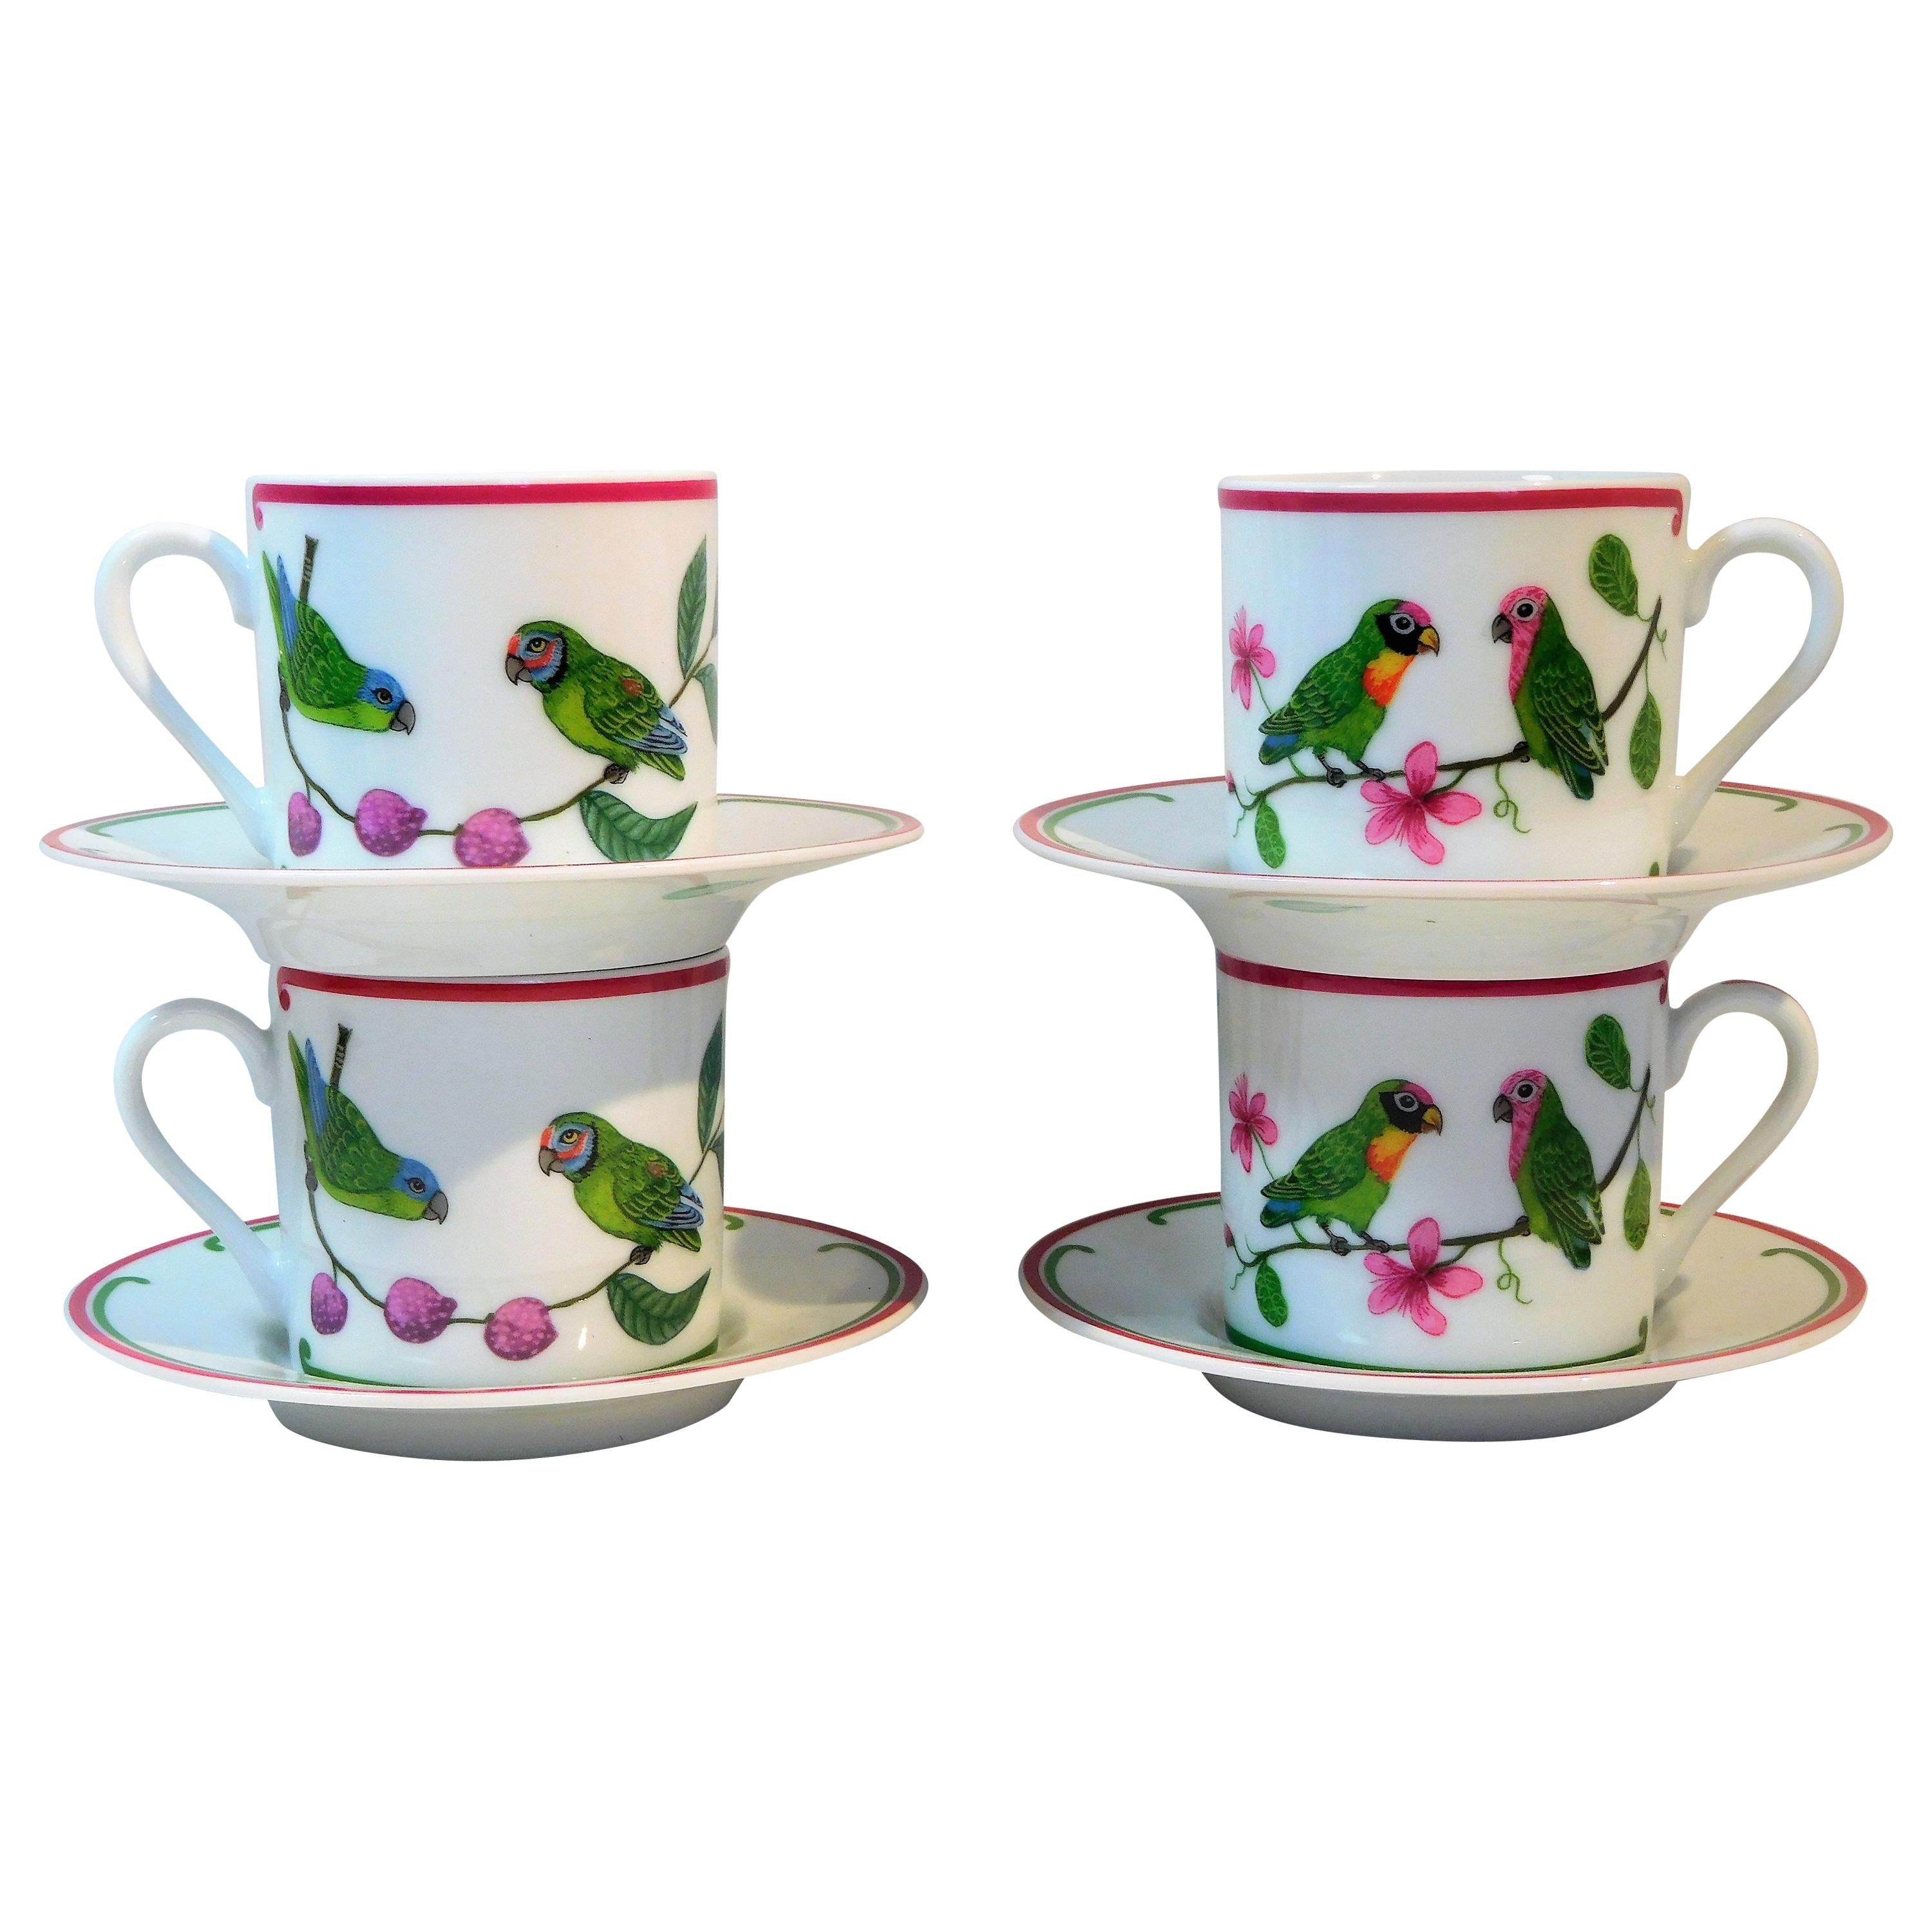 Lynn Chase "Parrots of Paradise" Set of 4 Porcelain Espresso Cups and Saucers For Sale